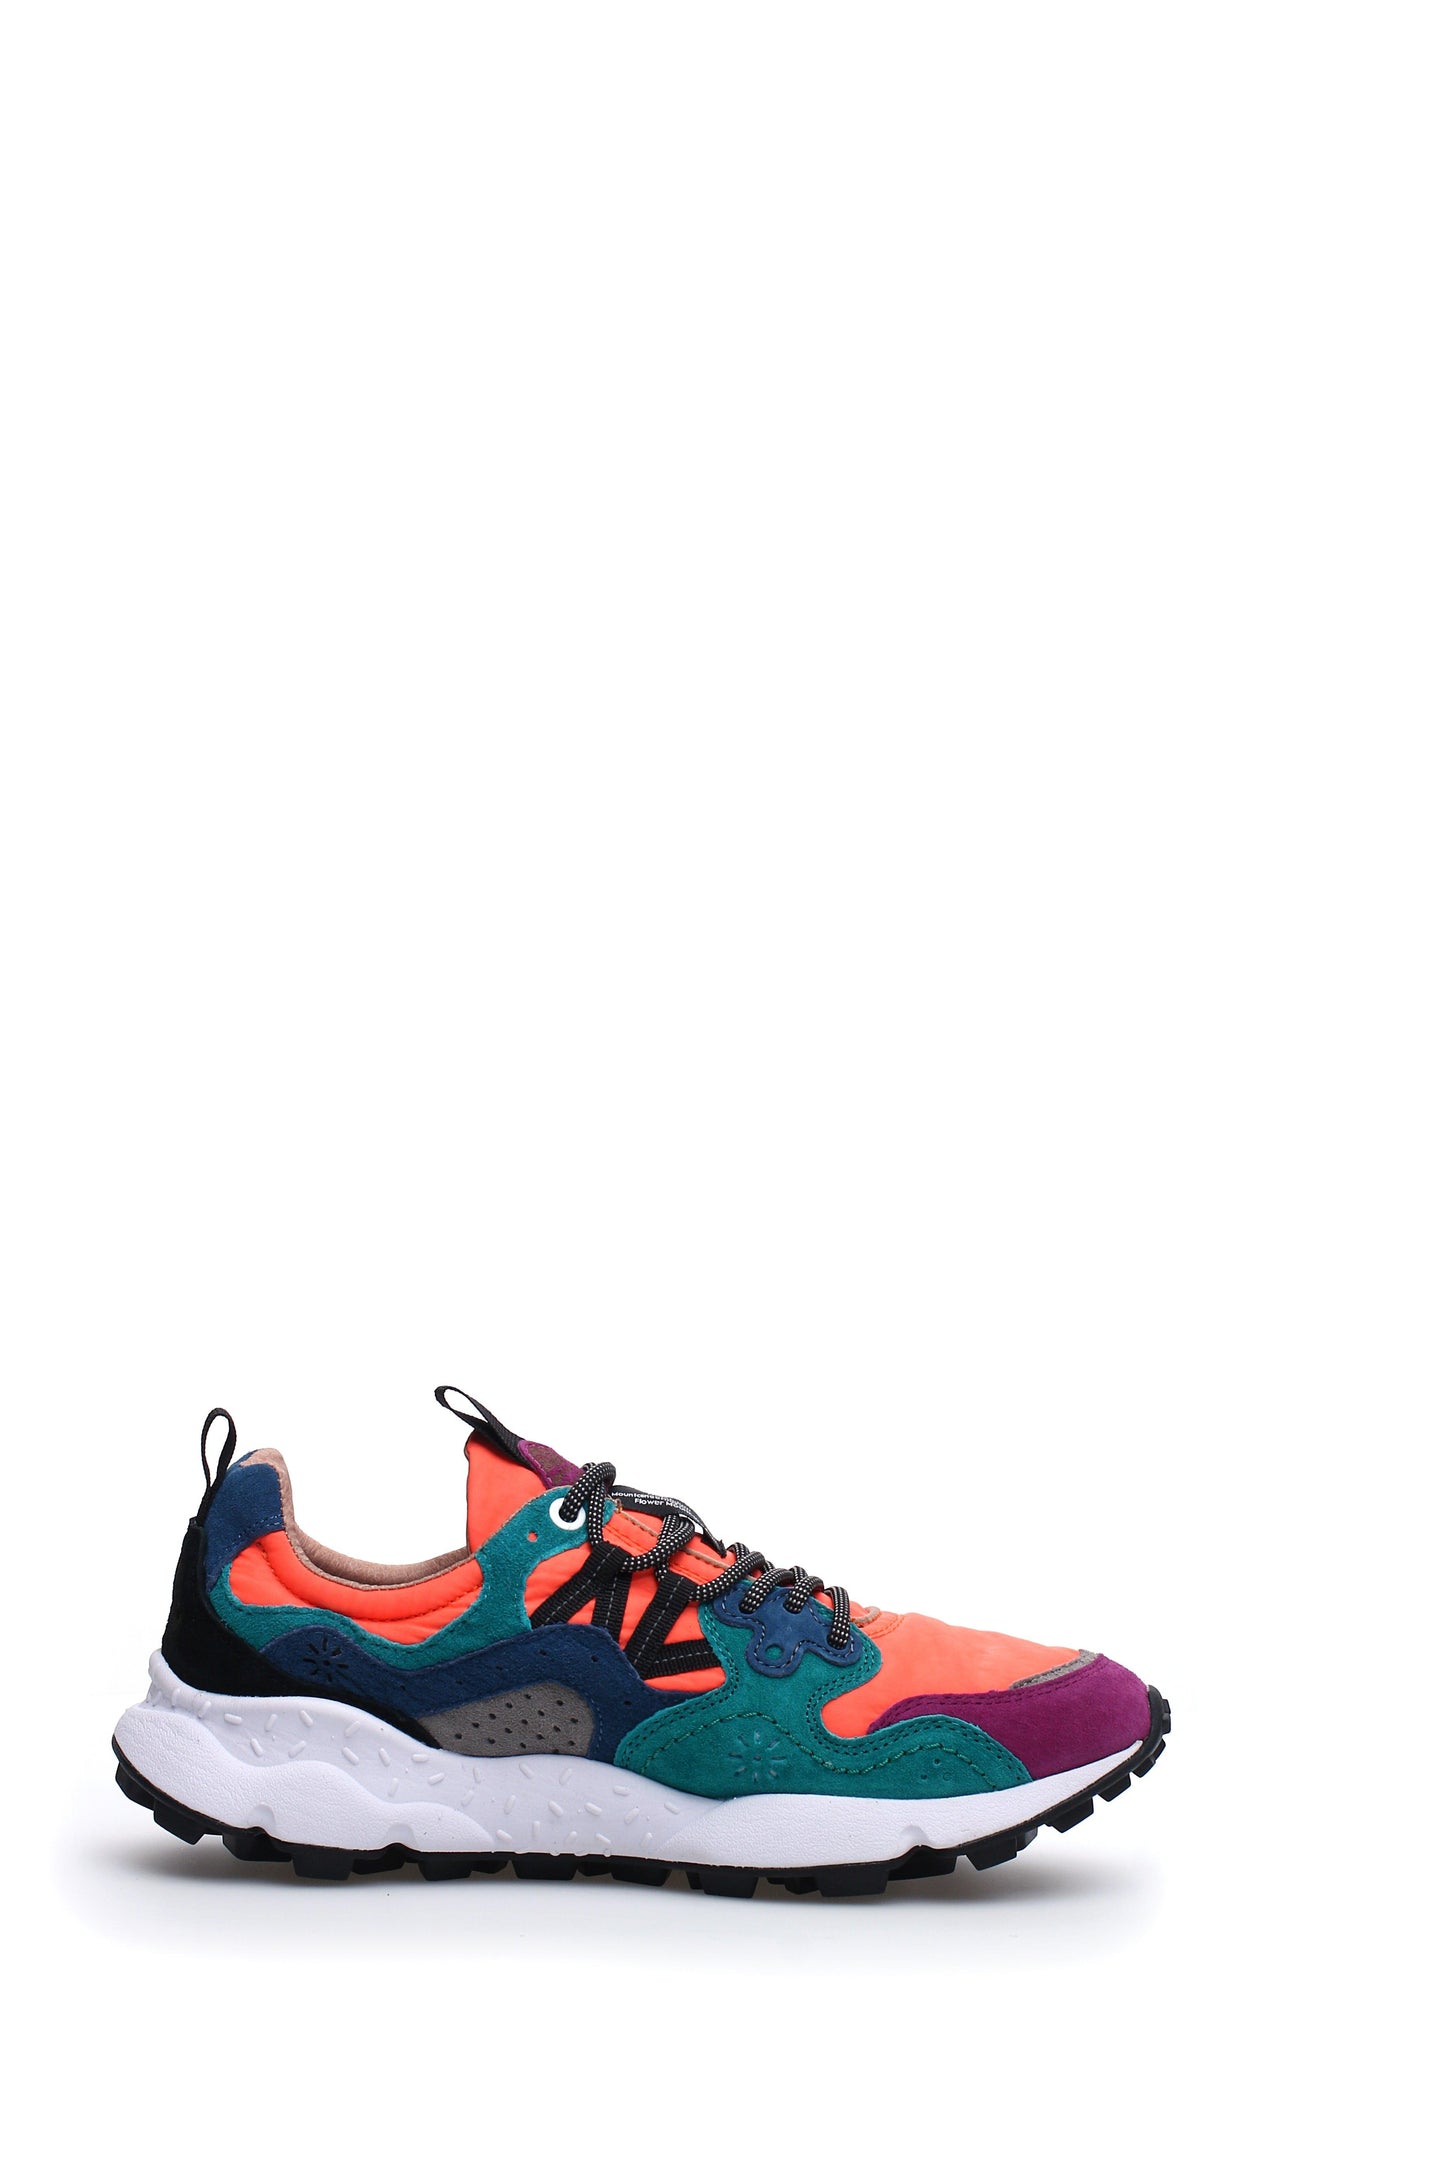 Flower Mountain - Yamano Orange & Violet Sneakers - 32 The Guild 